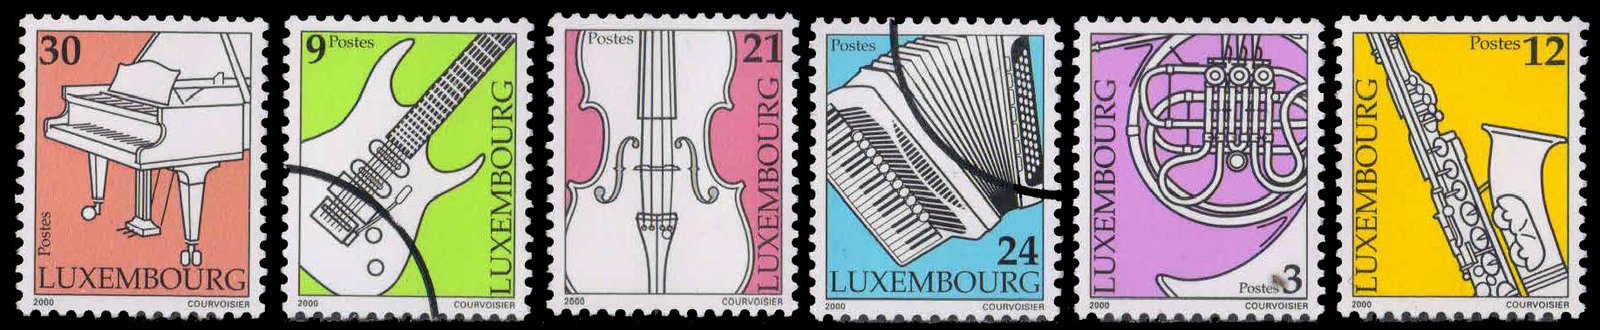 LUXEMBOURG 2000-Musical Instruments, SPECIMEN, Set of 6, MNH, S.G. 1523-28-Cat � 15-